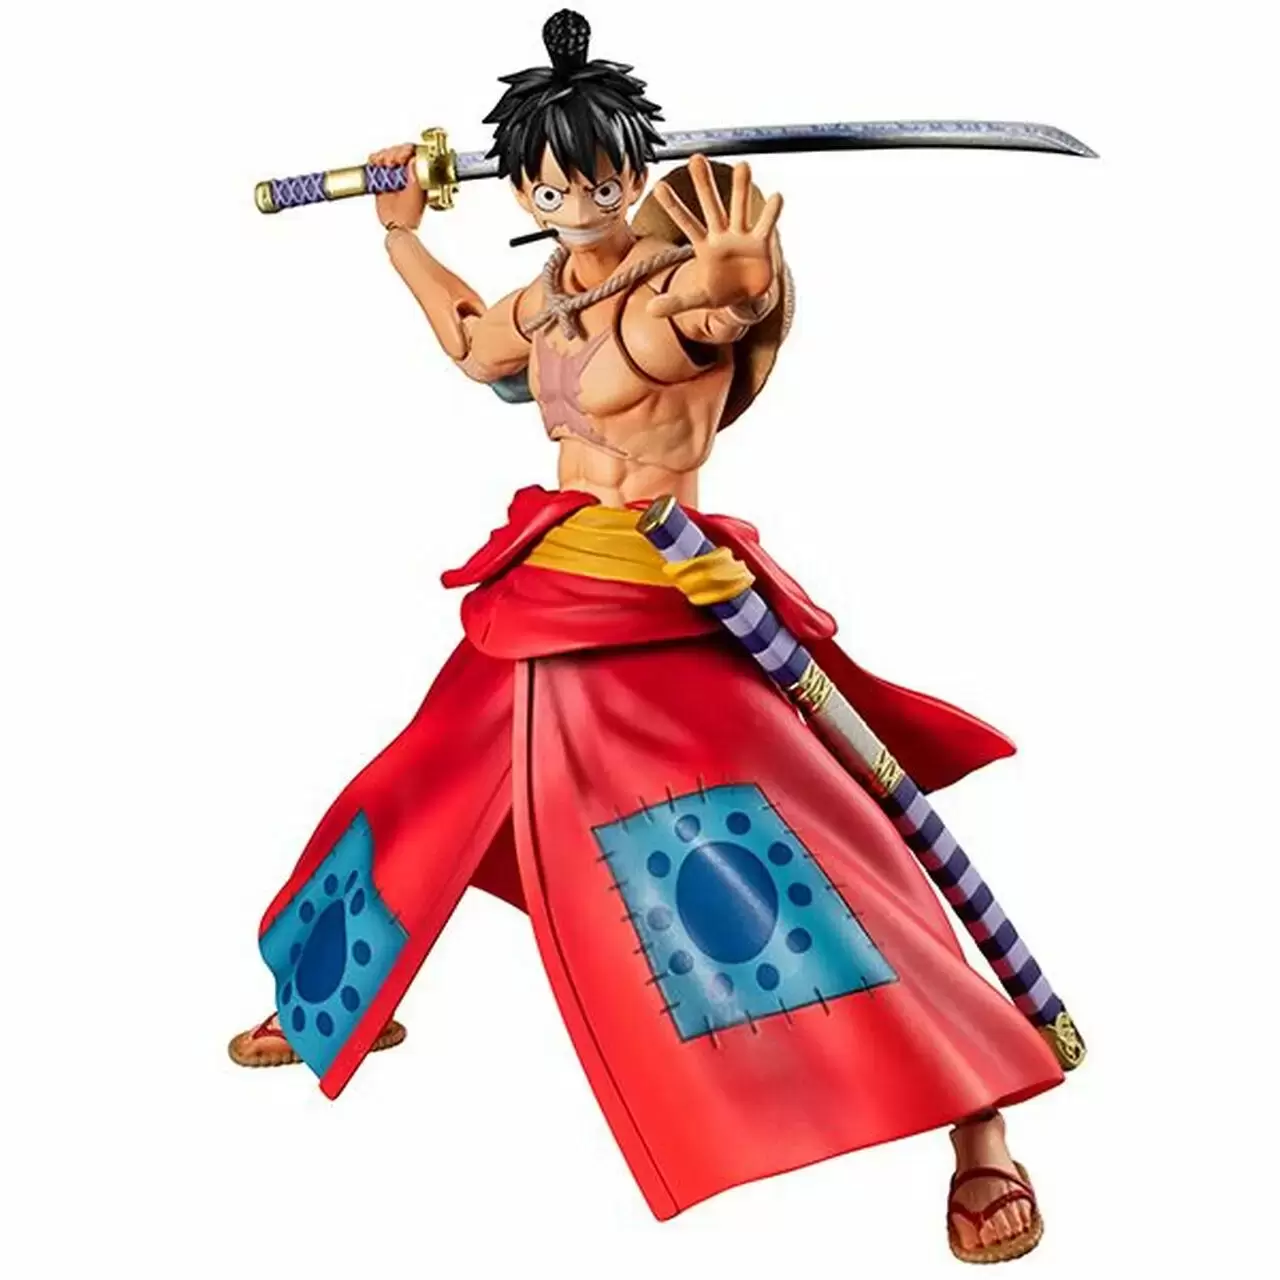 Anime Heroes – One Piece – Monkey D. Luffy Action Figure 36931